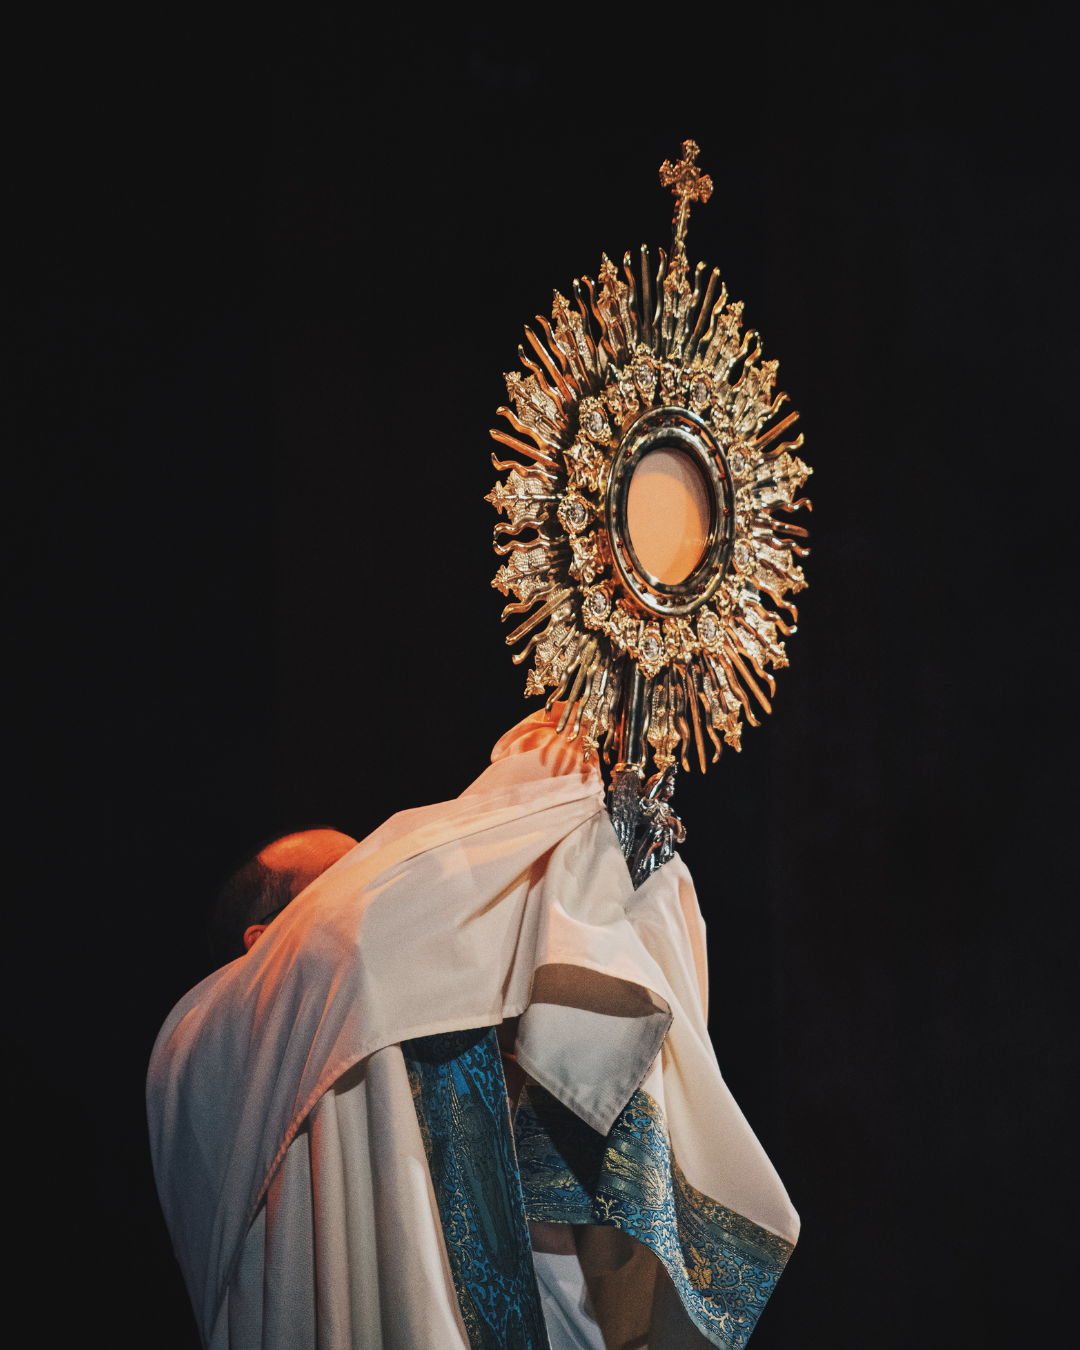 The Magnificence of the Holy Eucharist: What the Church Teaches, According to the Catechism